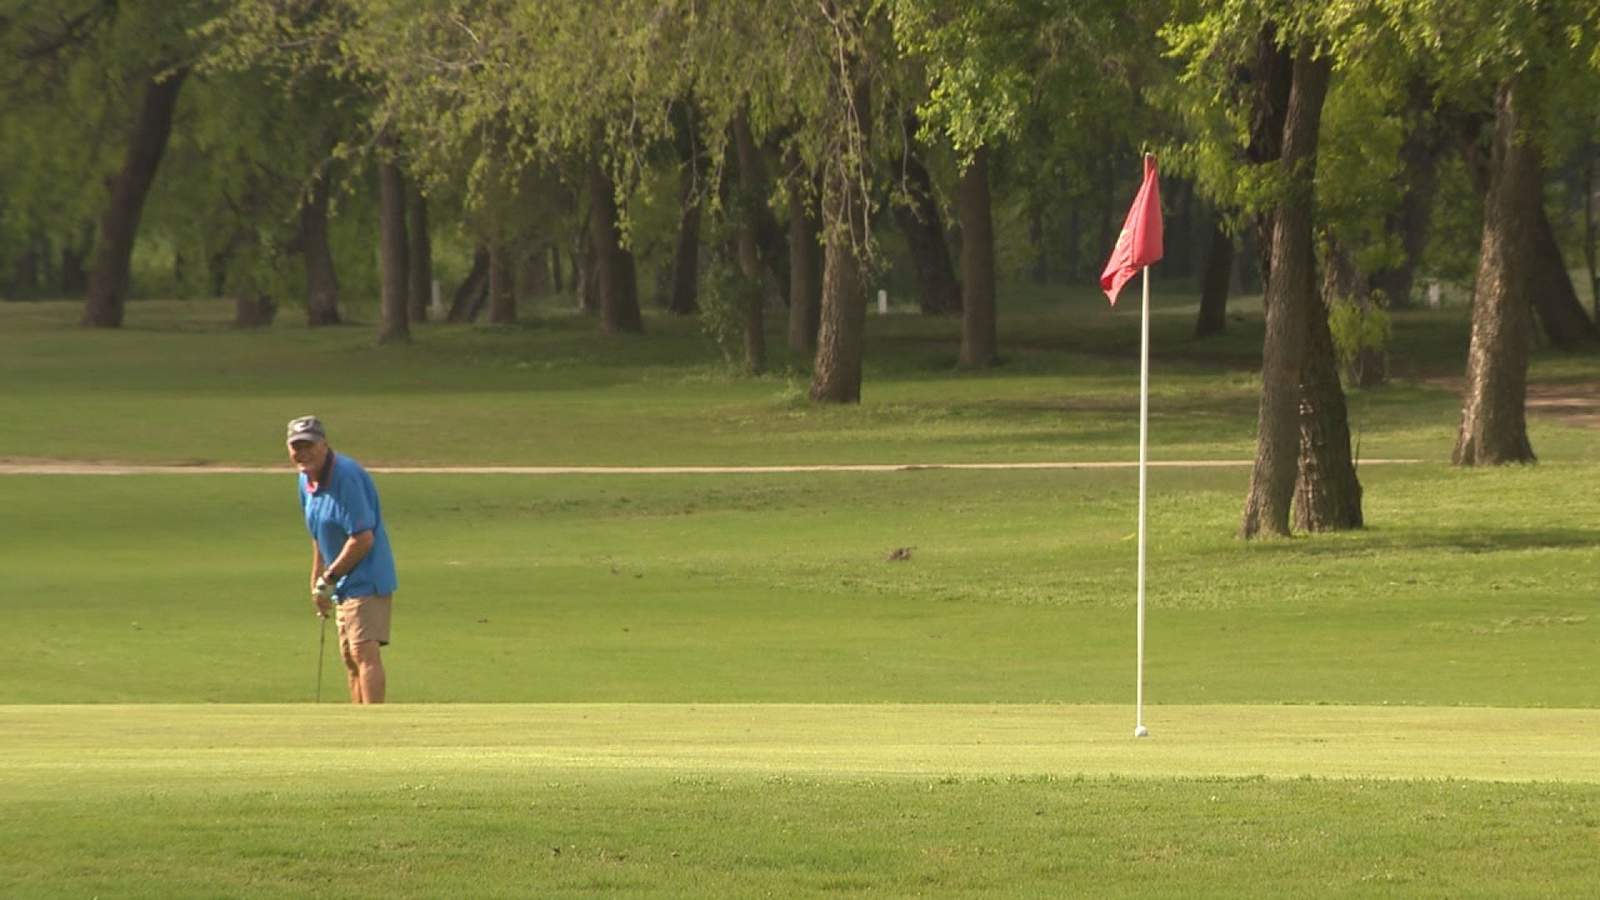 All 8 municipal golf courses in San Antonio set to reopen